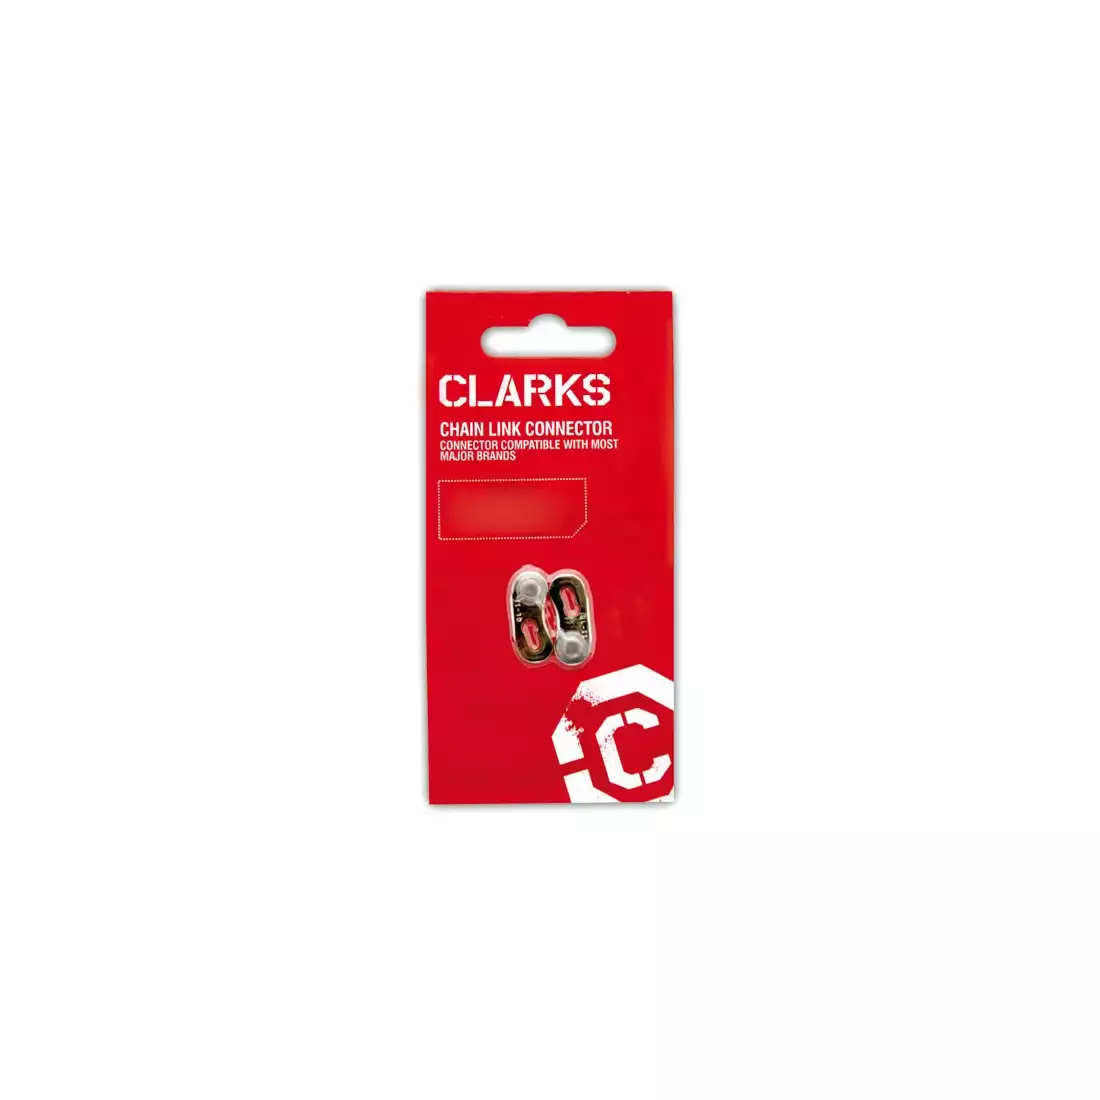 CLARKS CL410 Bicycle chain clip, 1-row Single Speed, Silver